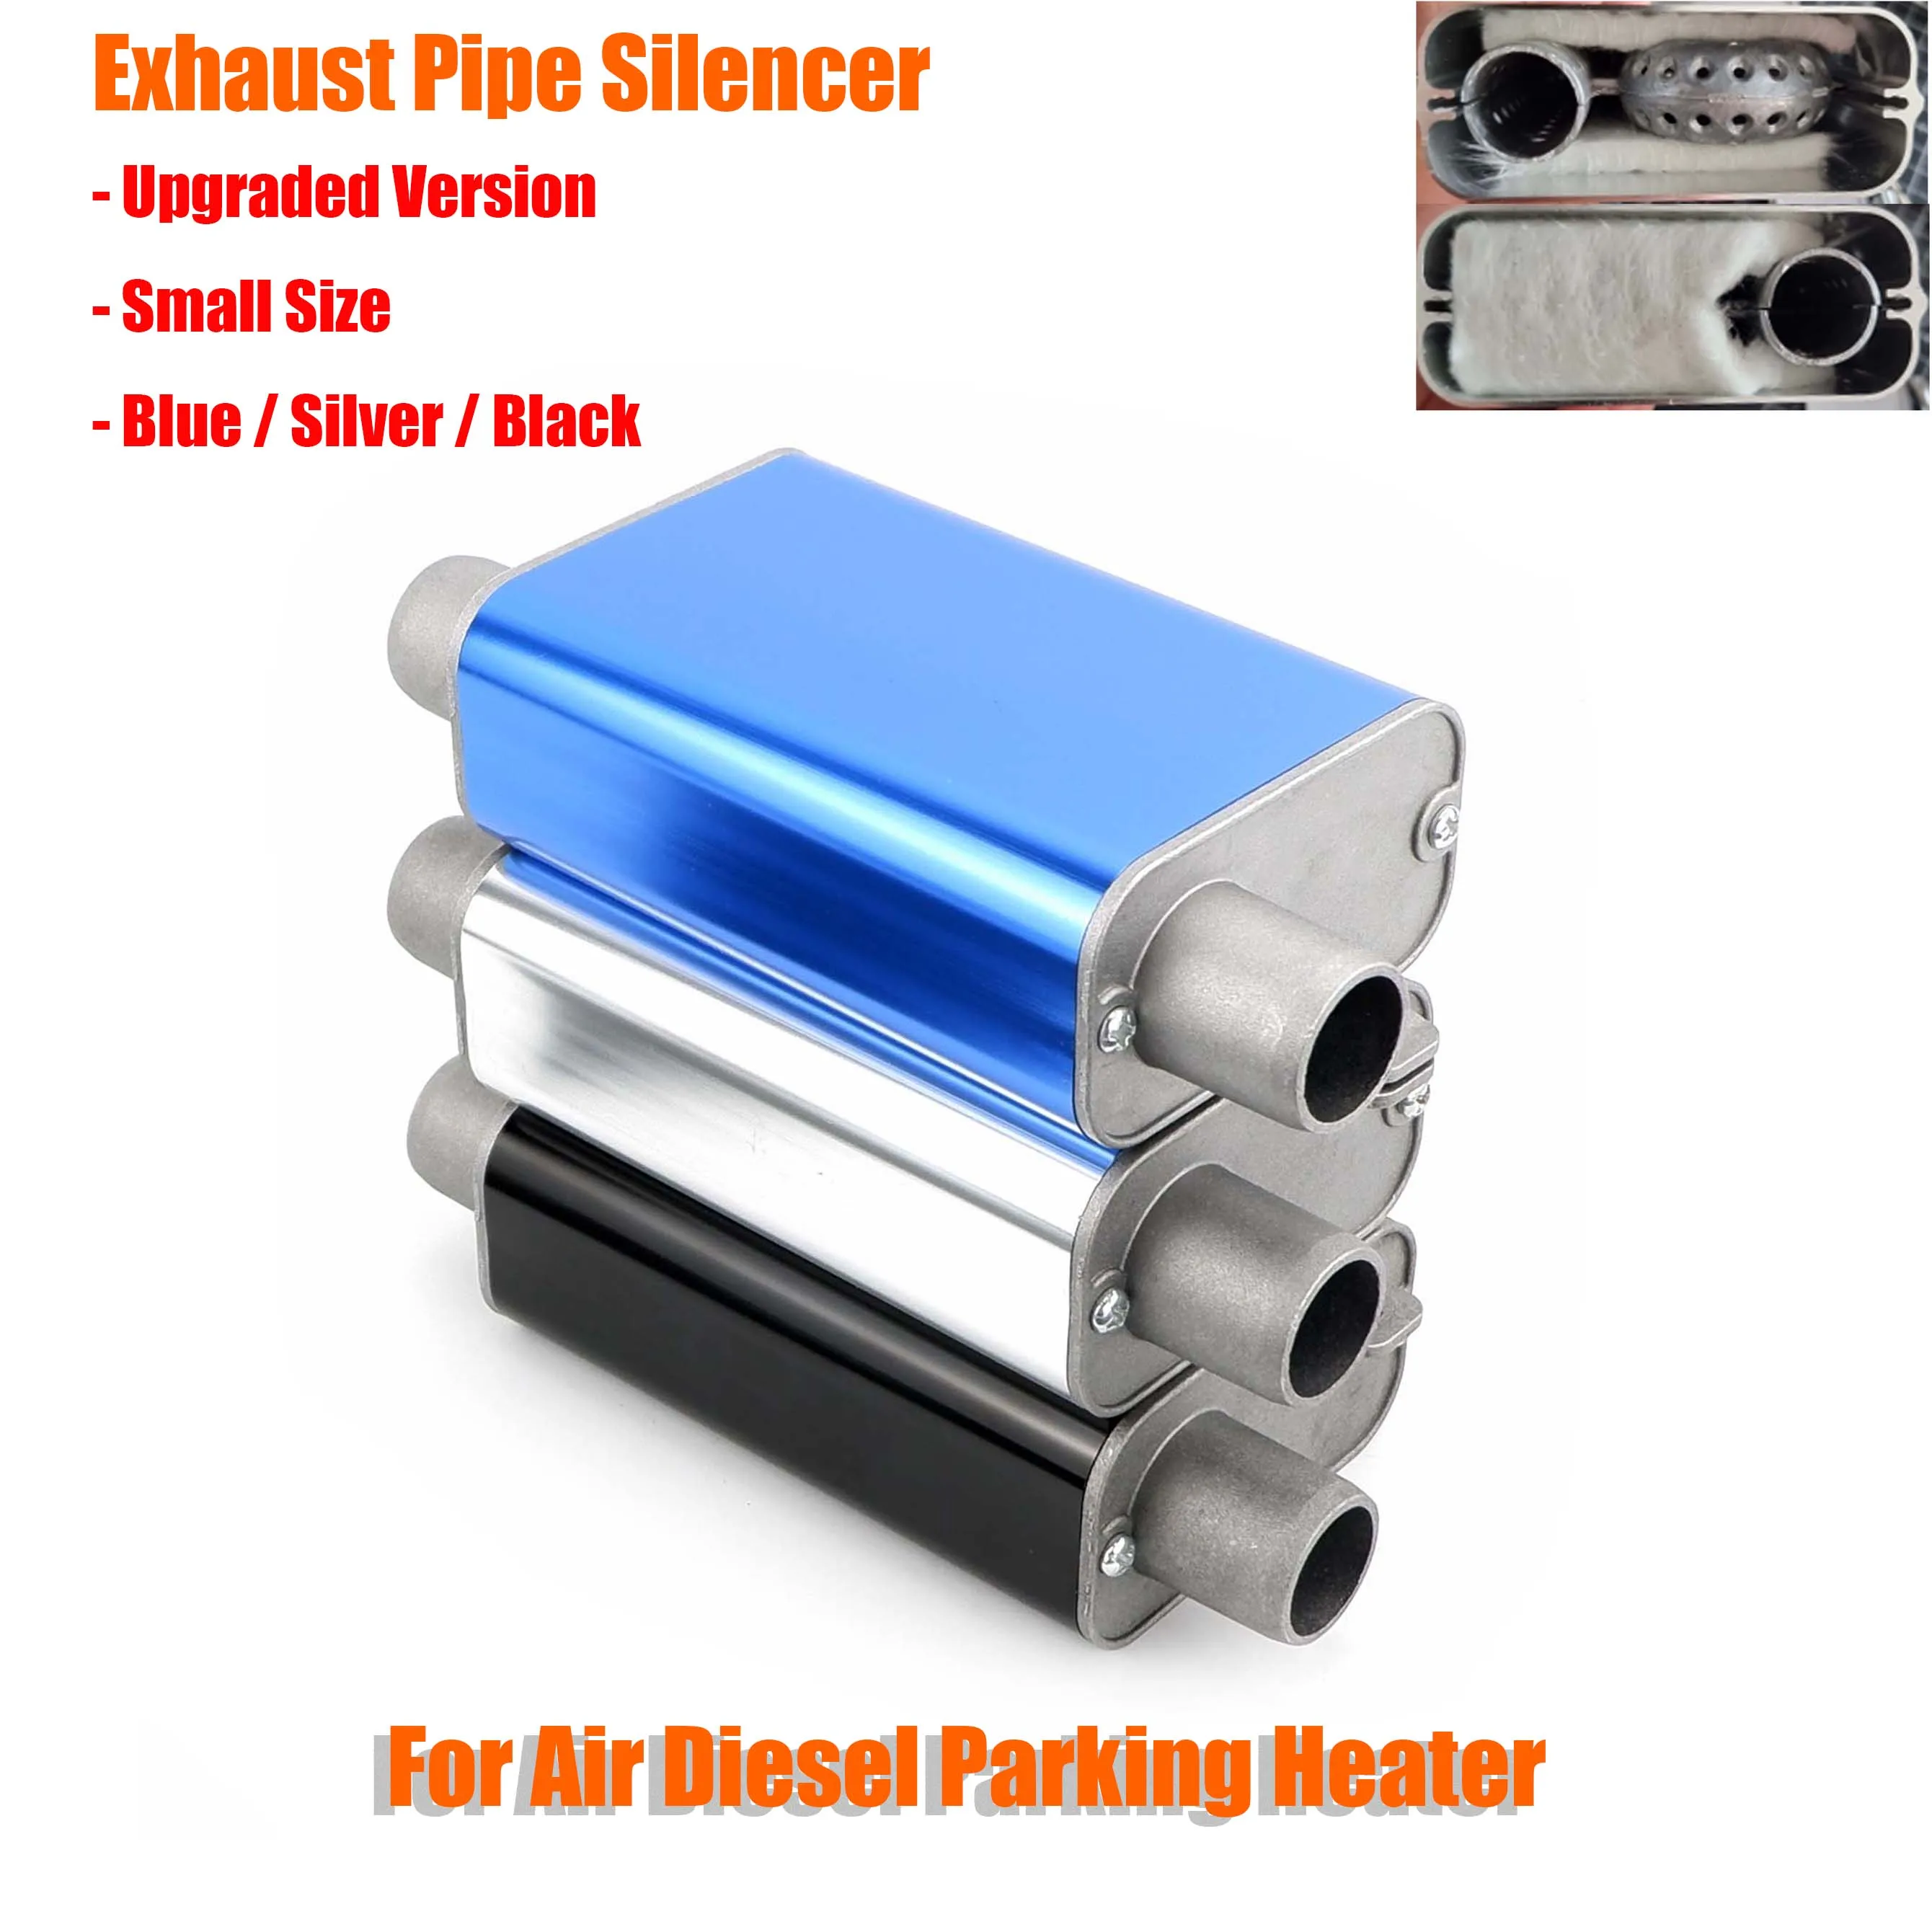 

24mm Muffler Silencer S Curved Air Diesel Parking Heater Exhaust Pipe Aluminum Alloy Small Size For Car Truck Camper VAN